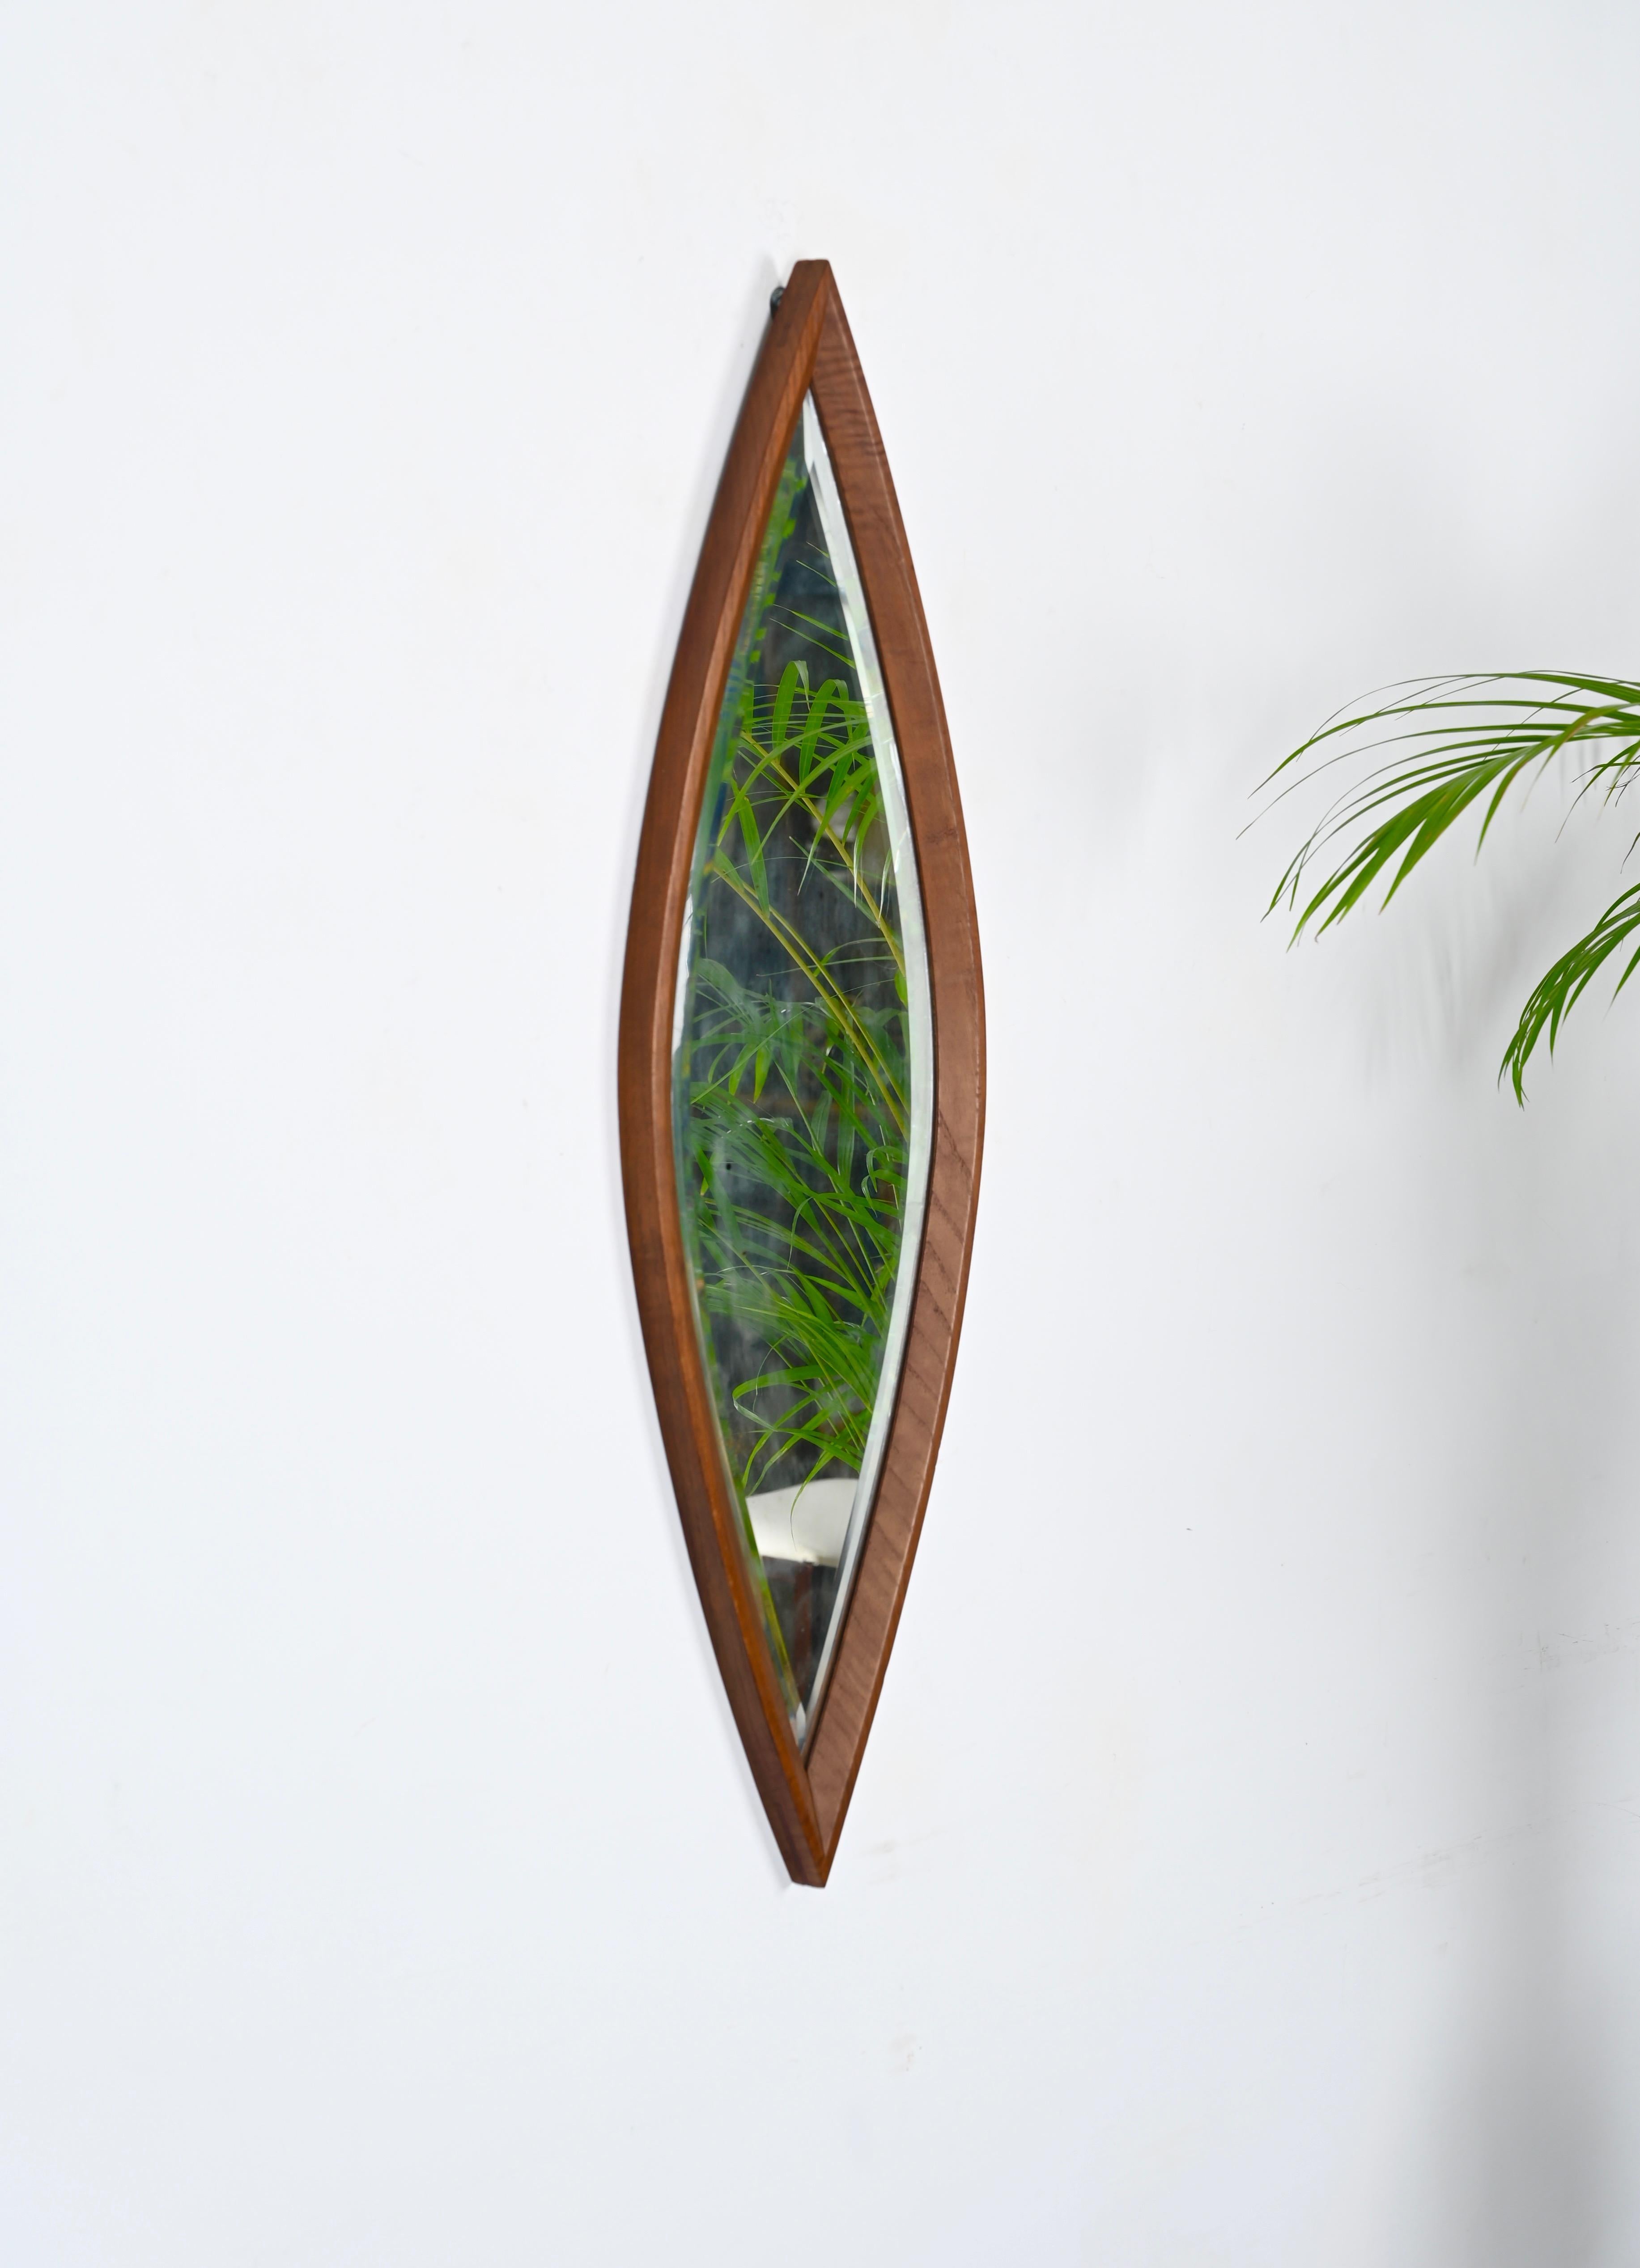 Gorgeous eye-shaped mirror designed in Italy during the 1950s.

This beautiful mirror features and an eye-shaped frame in walnut wood with a stunning beveled mirror inside. The mirror has a protective cover in wood on the back.

The quality of the